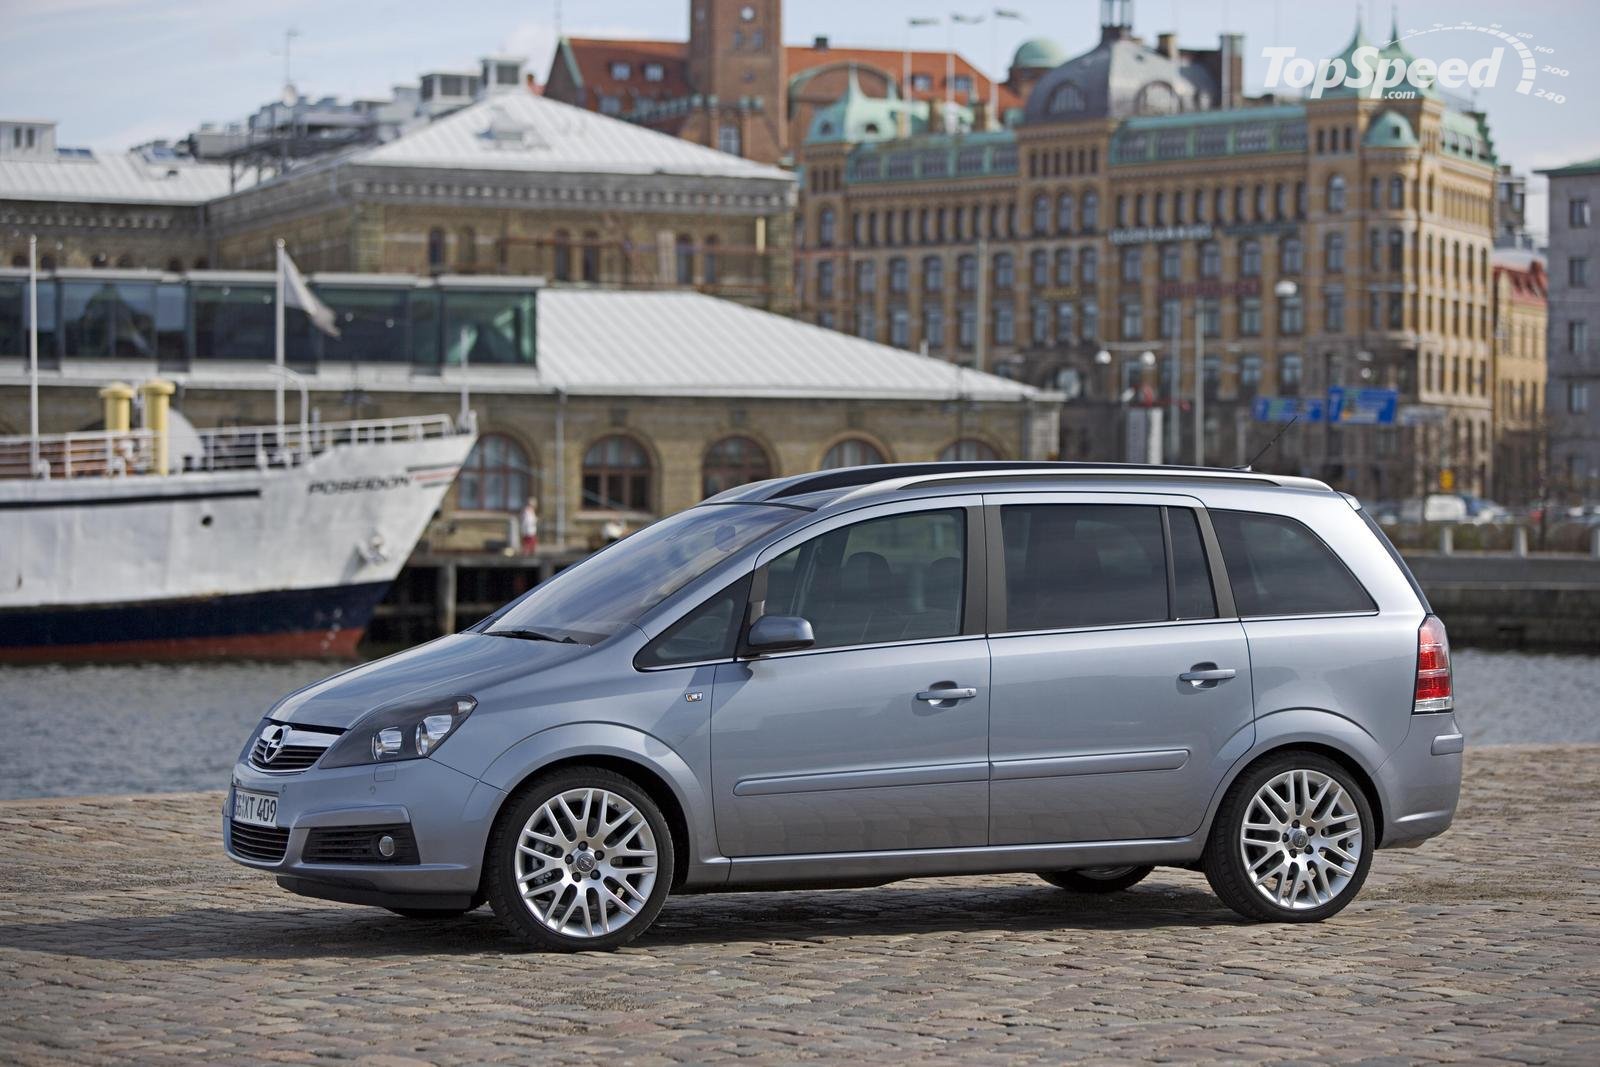 Opel Zafira 16. View Download Wallpaper. 1600x1067. Comments